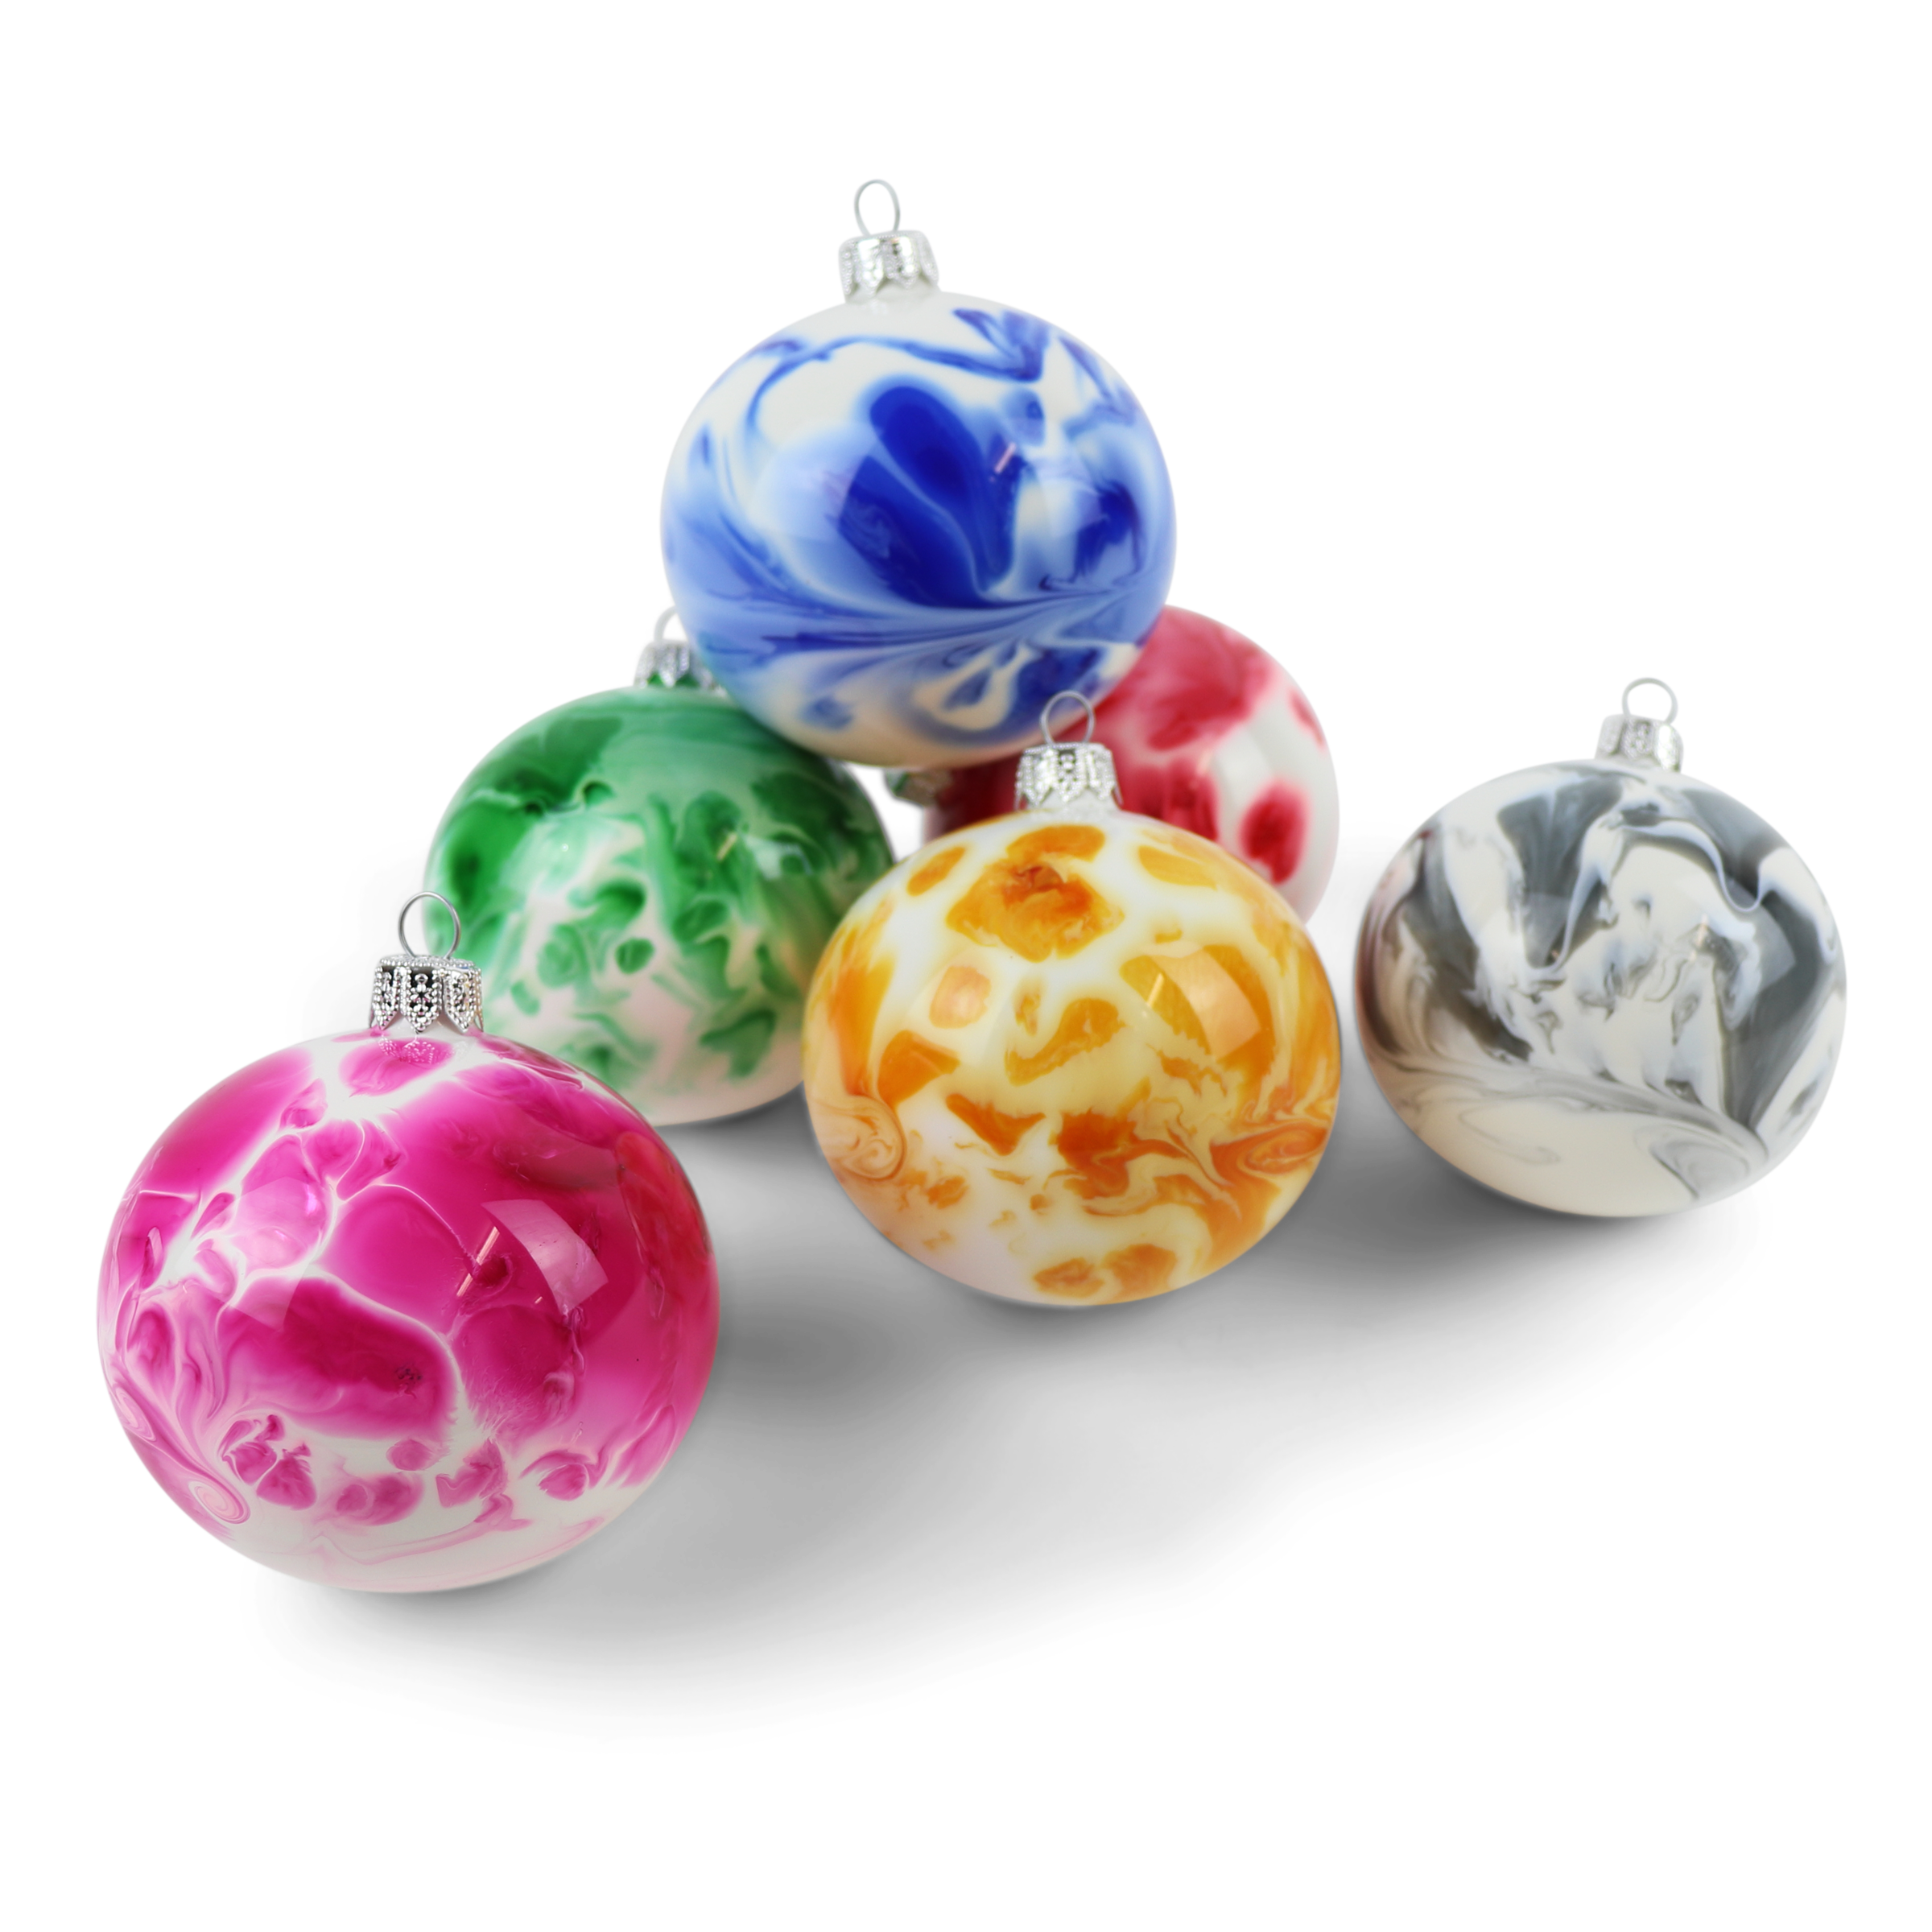 Marble Effect Bauble, 8cm Pink